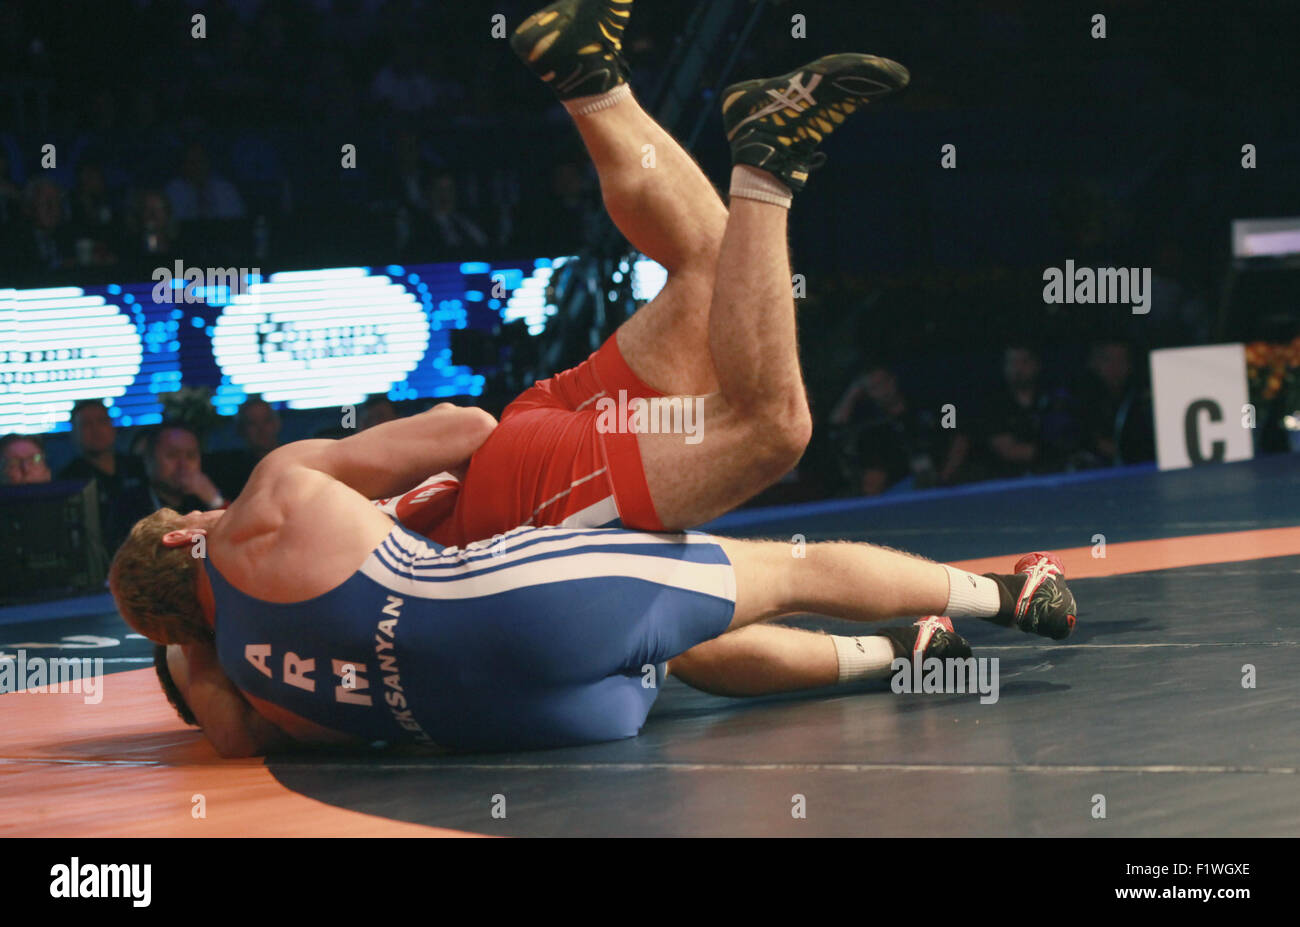 Las Vegas, Nevada, USA. 7th Sep, 2015. Armenian Artur Aleksanyan defeats Iran's Ghasem Rezaei to win the 98kg greco roman wrestling weight class on September 7, 2015 during 2015 World Wrestling Championships at Orleans Arena in Las Vegas, Nevada. Credit:  Marcel Thomas/ZUMA Wire/Alamy Live News Stock Photo